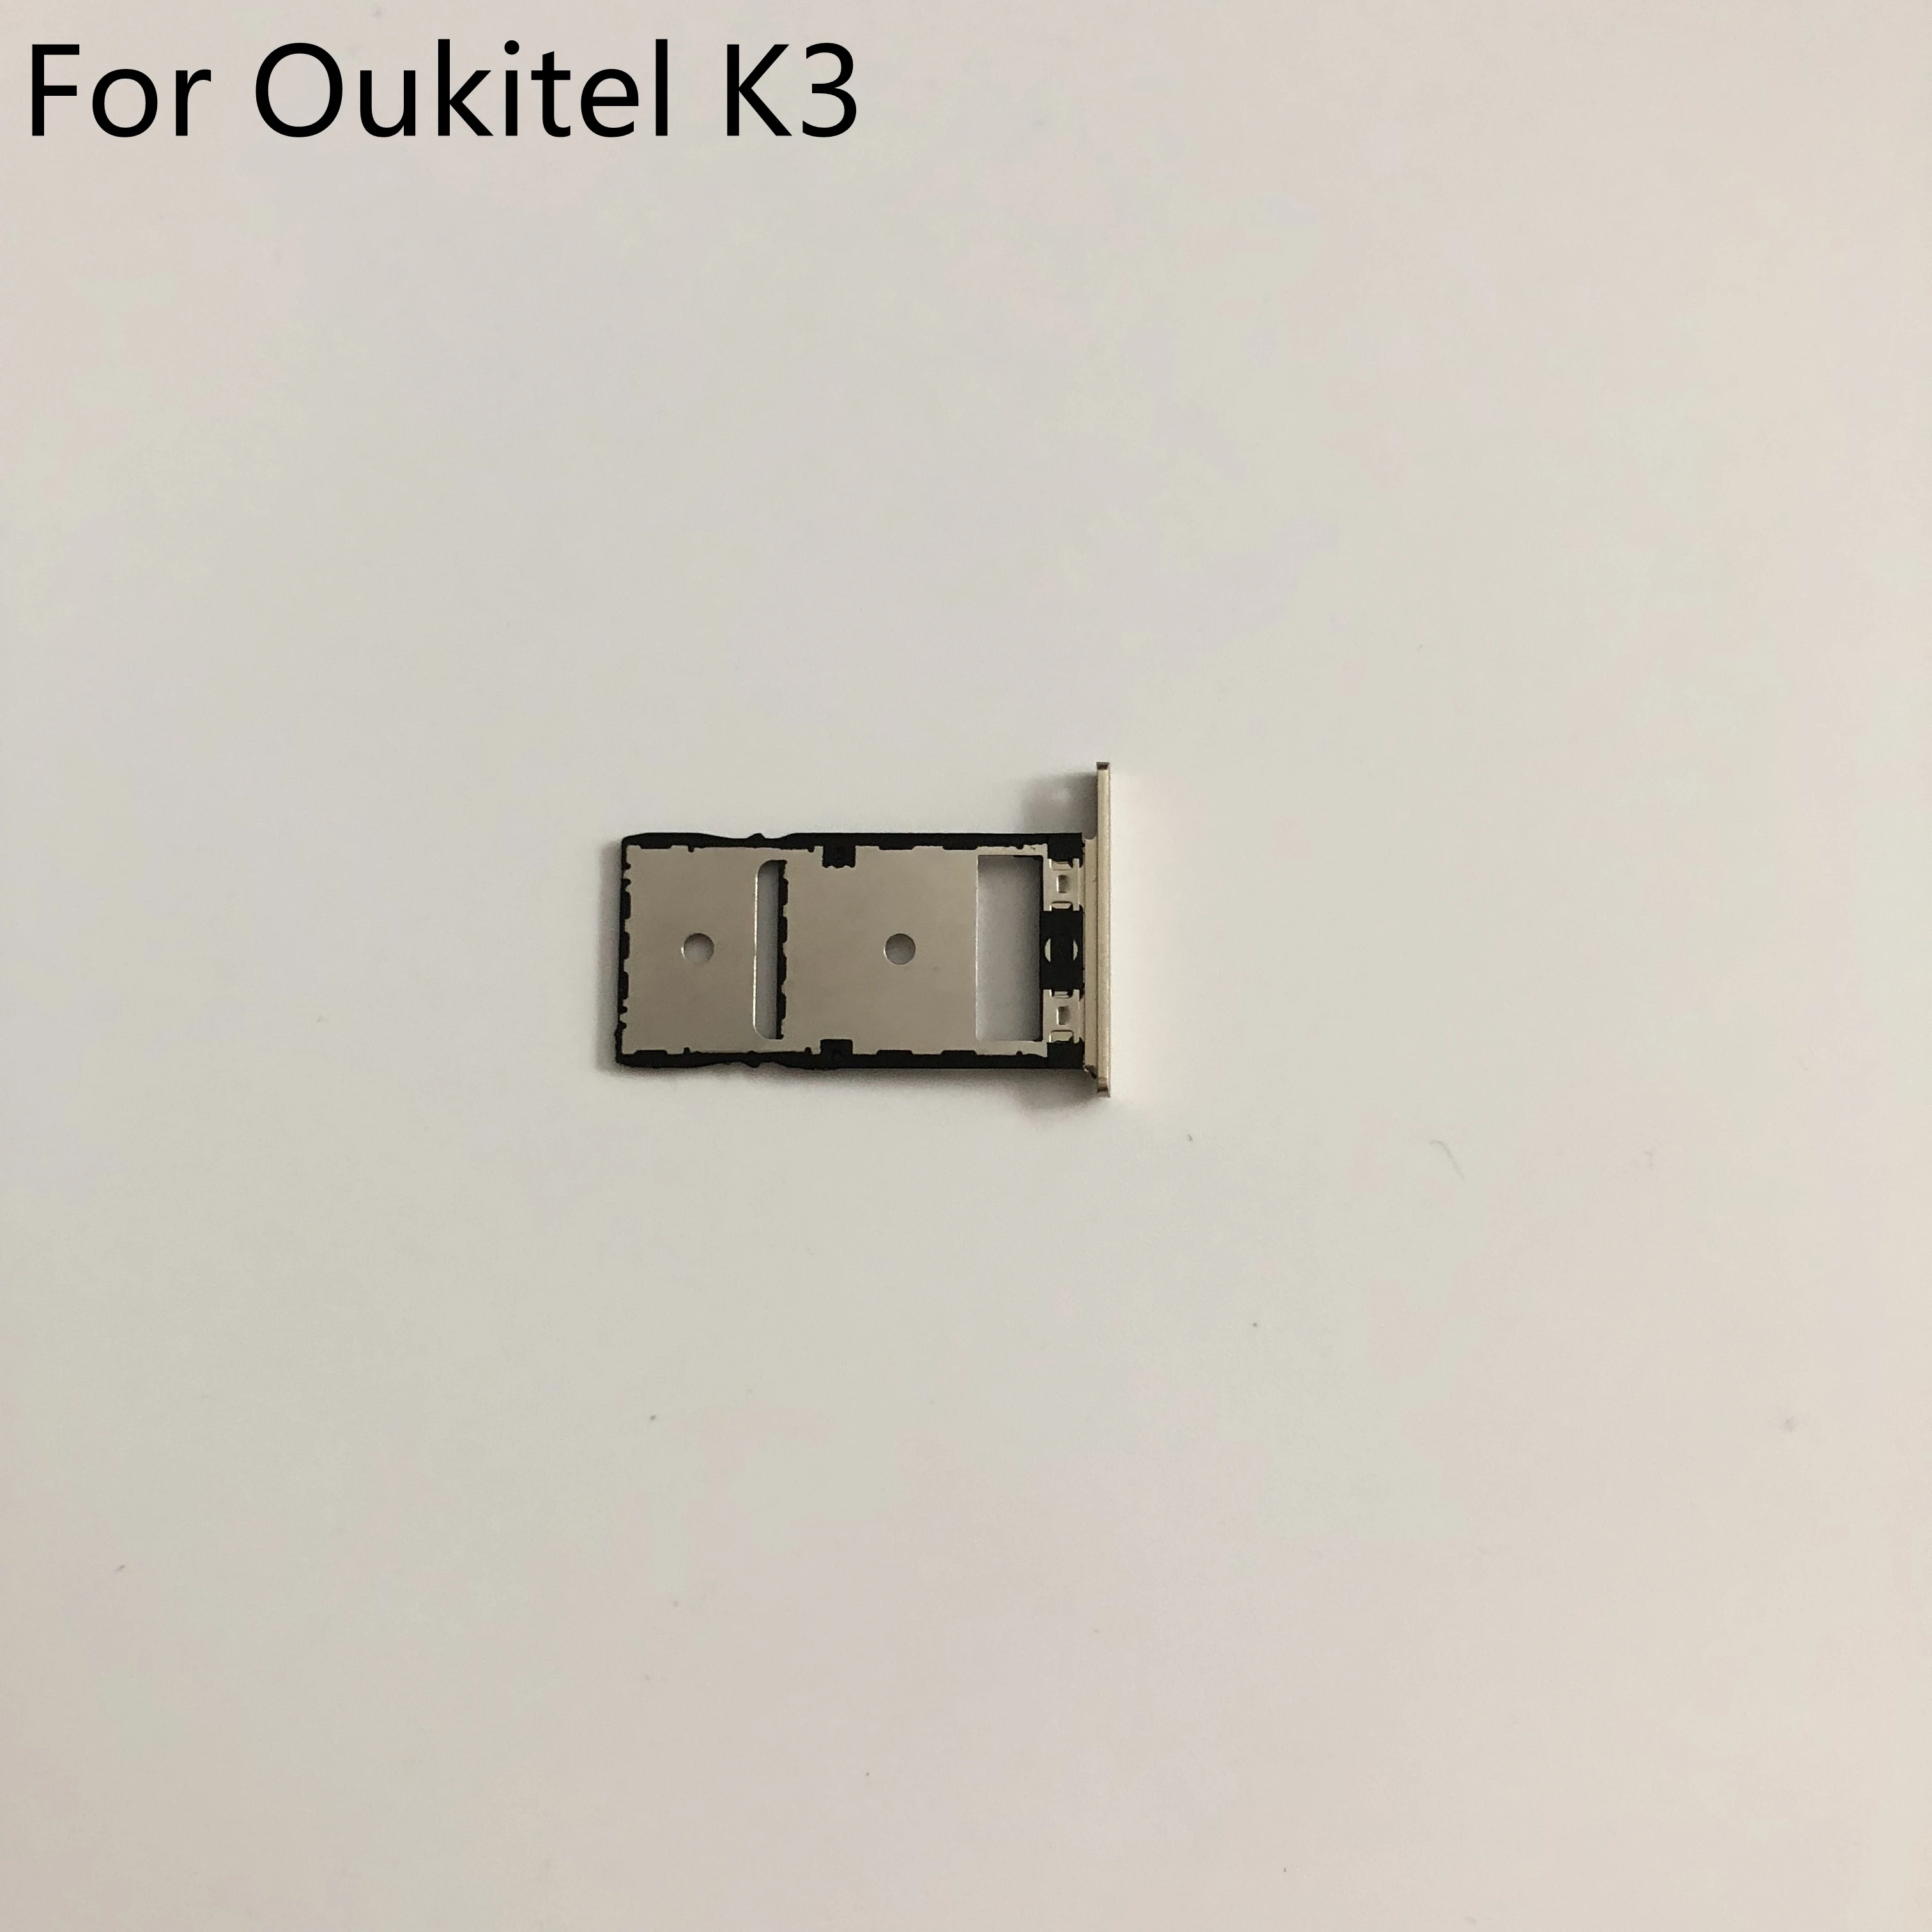 New Sim Card Holder Tray Card Slot For Oukitel K3 MT6750T Octa Core 5.5 inch FHD 1920x1080 + Tracking Number